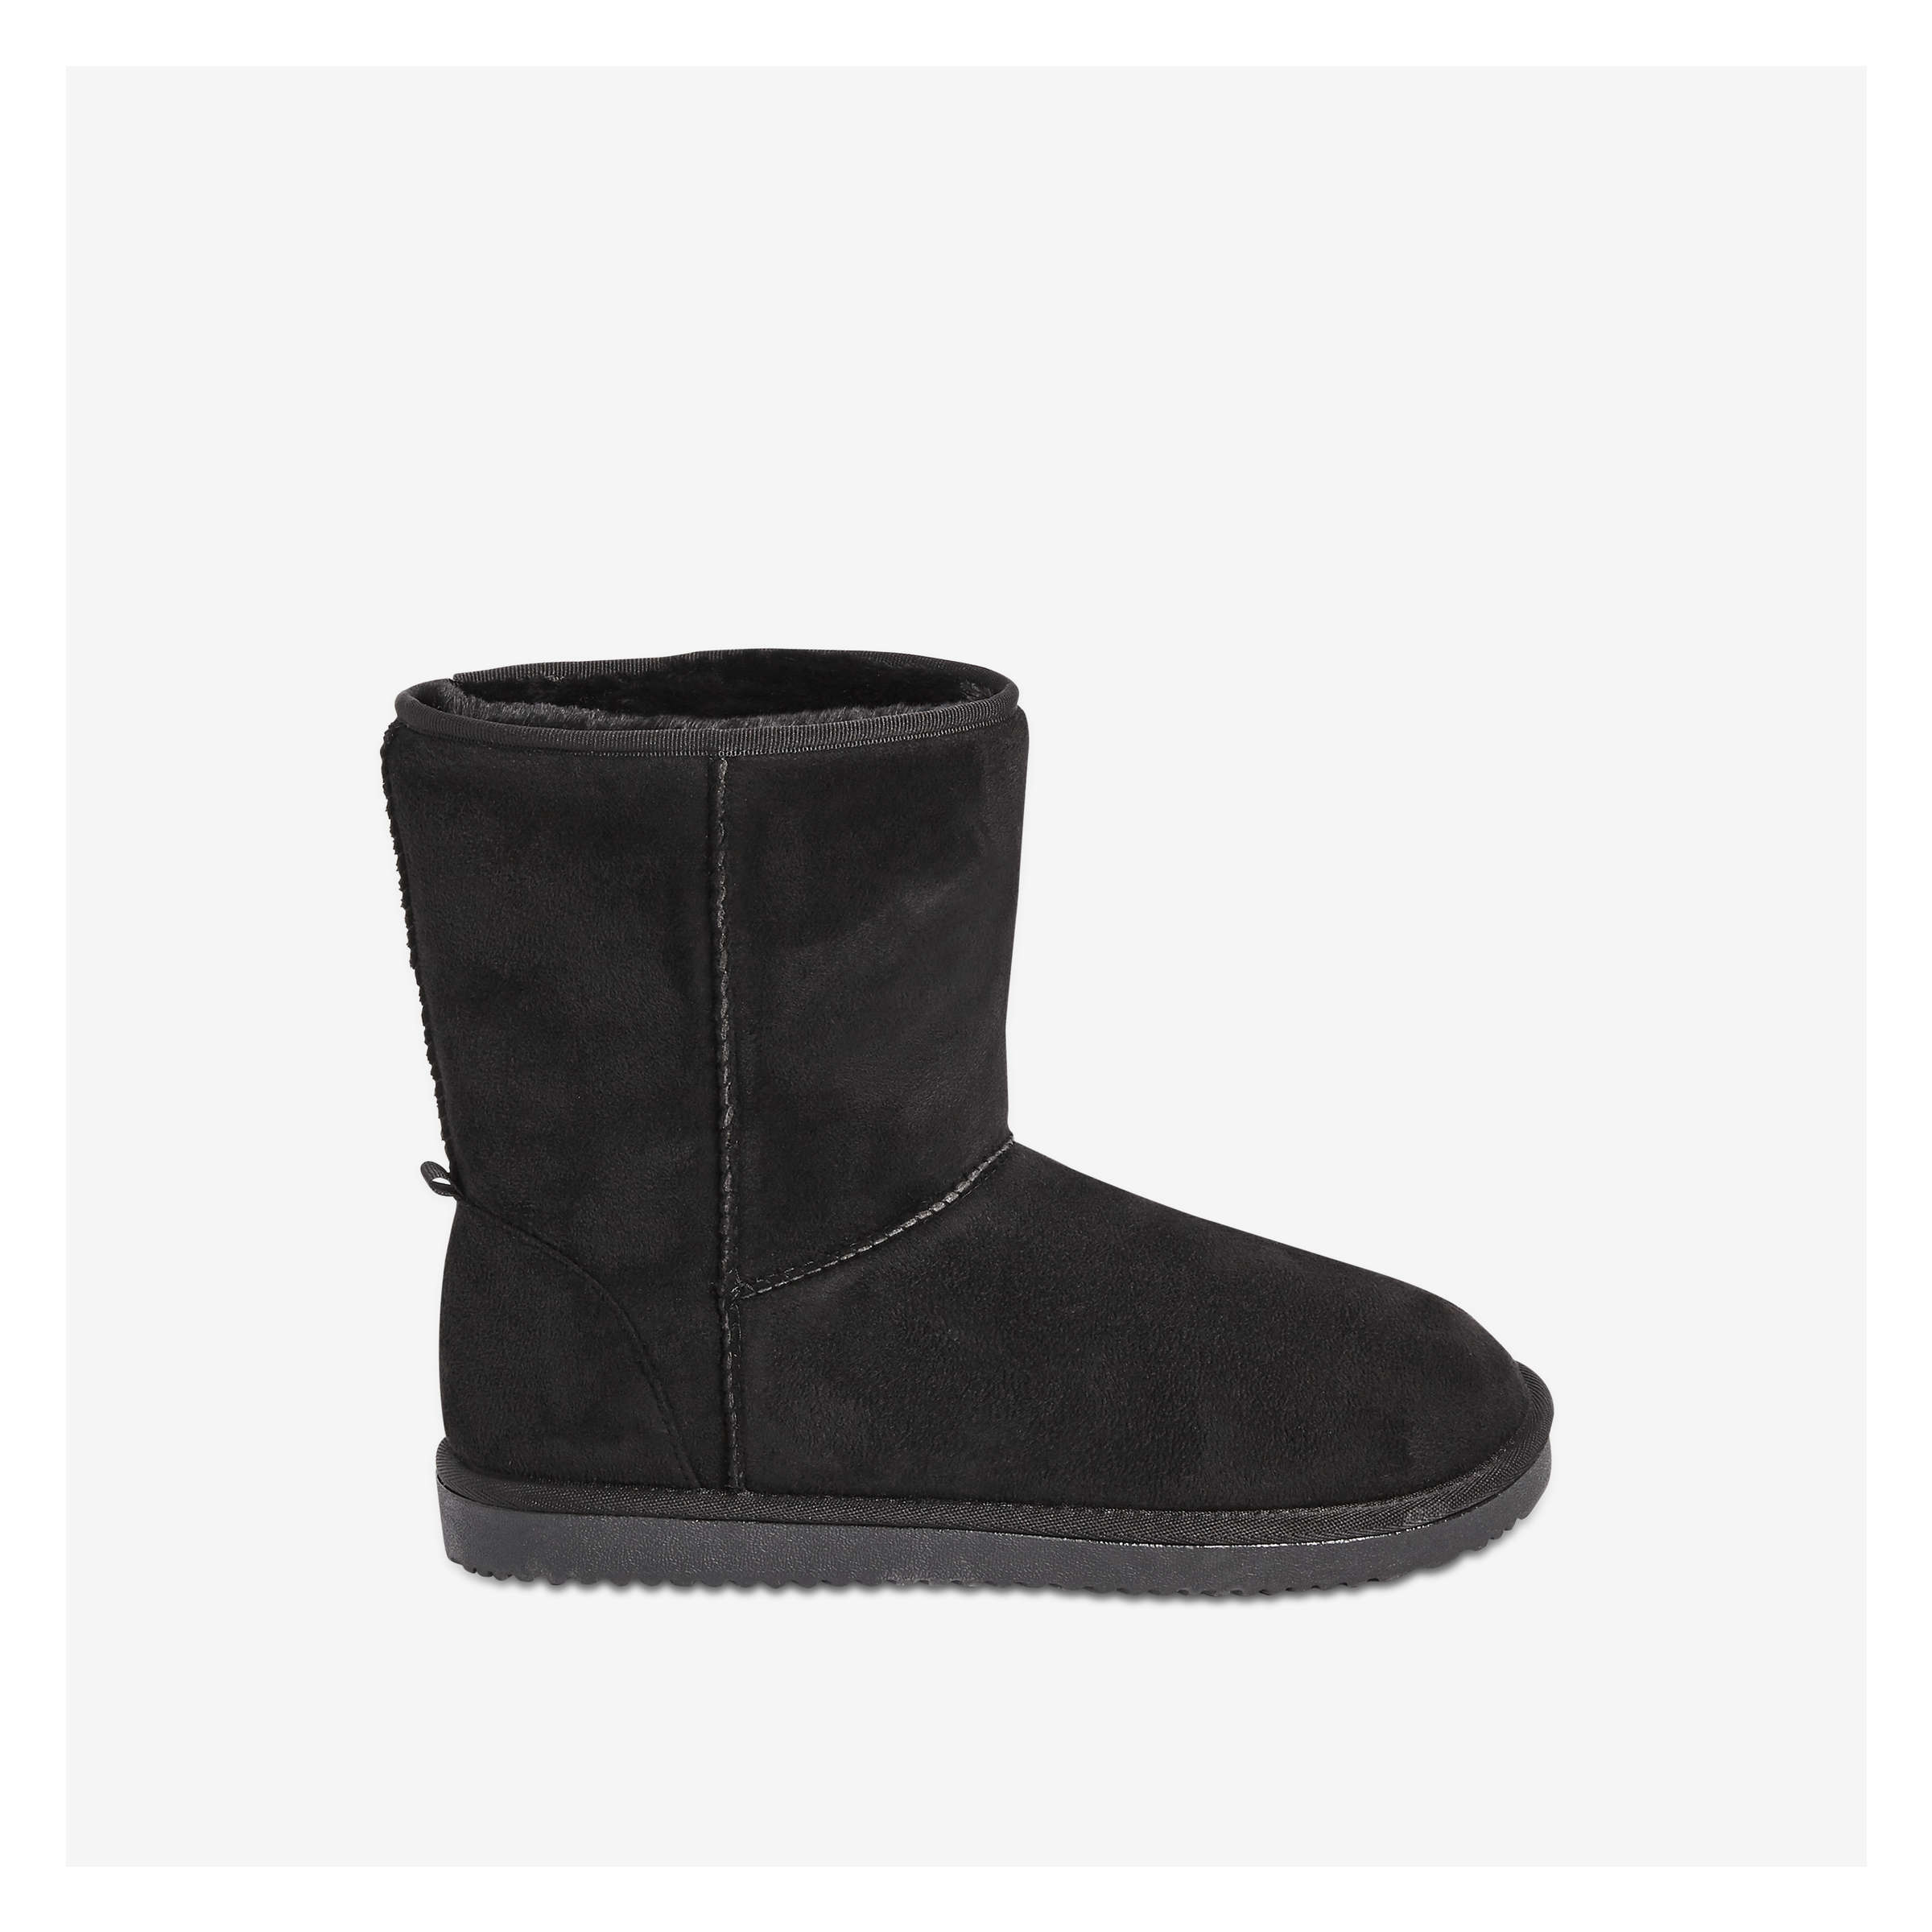 suede mid calf boots